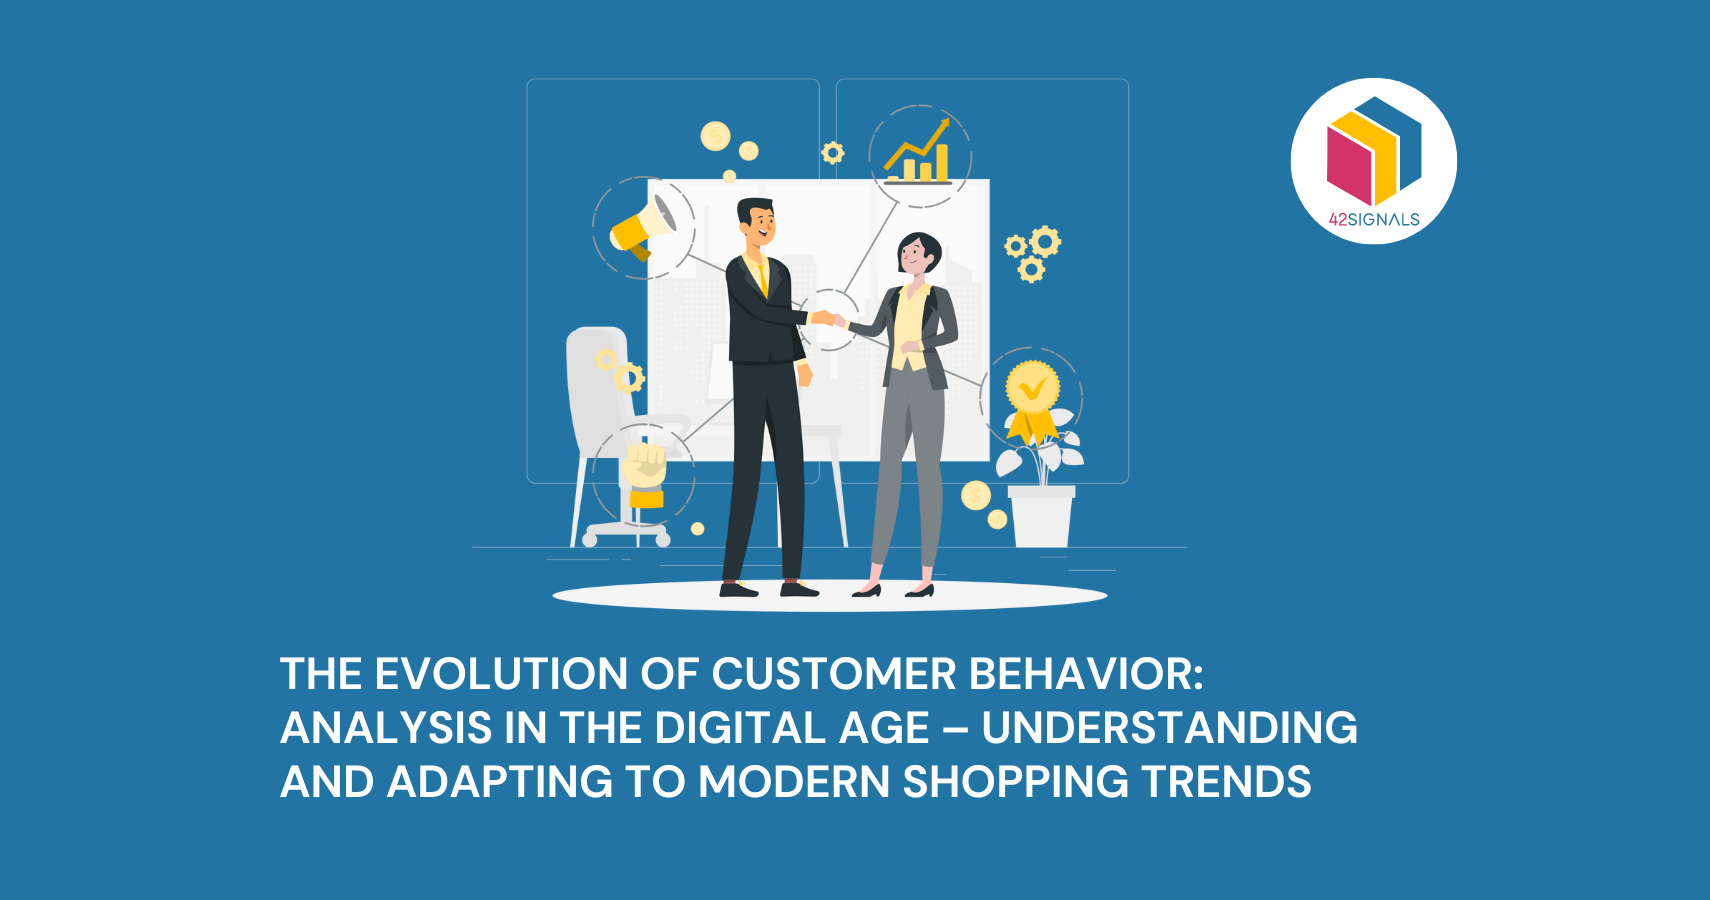 The Evolution of Customer Behavior and analysis in the digital age - understanding and adapting to modern shopping trends